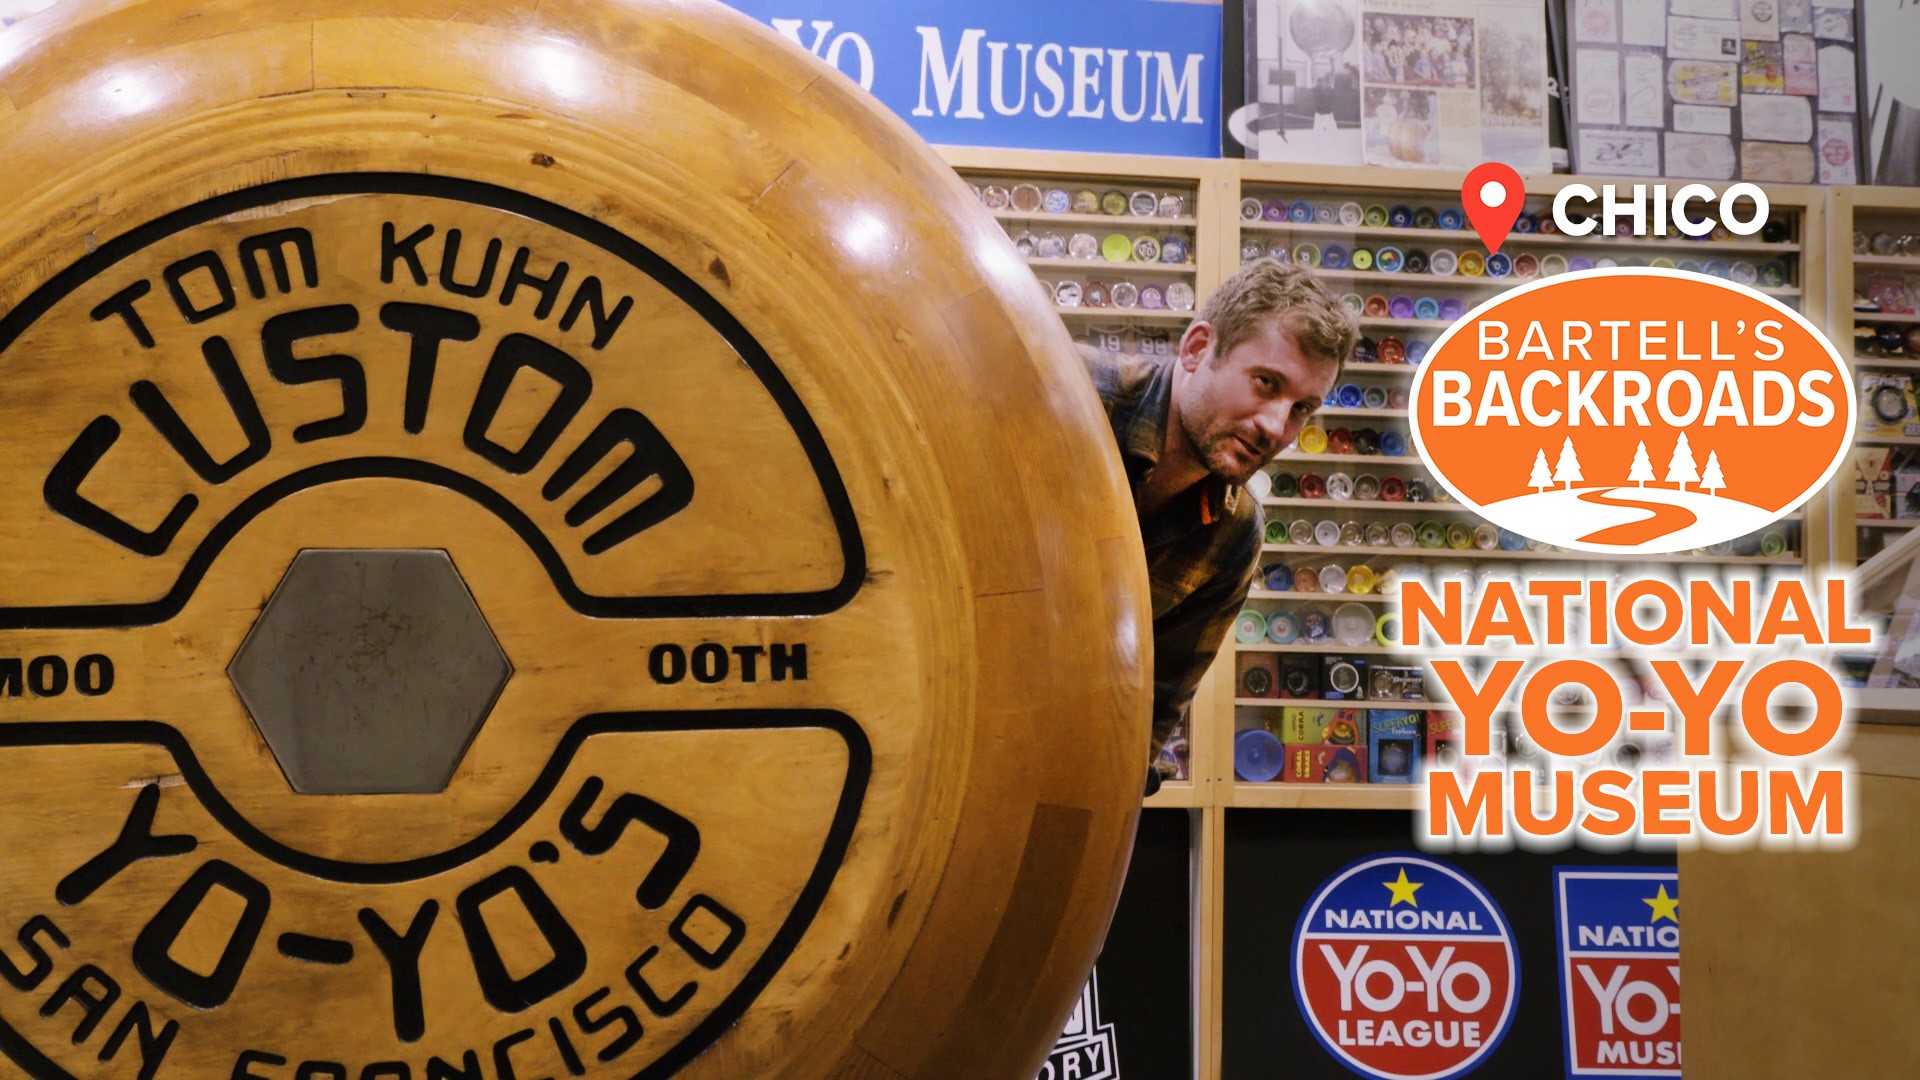 At the National Yo-Yo Museum in Chico, one man keeps his love of the familiar toy on display. Stop by and he may even teach you a trick or two.